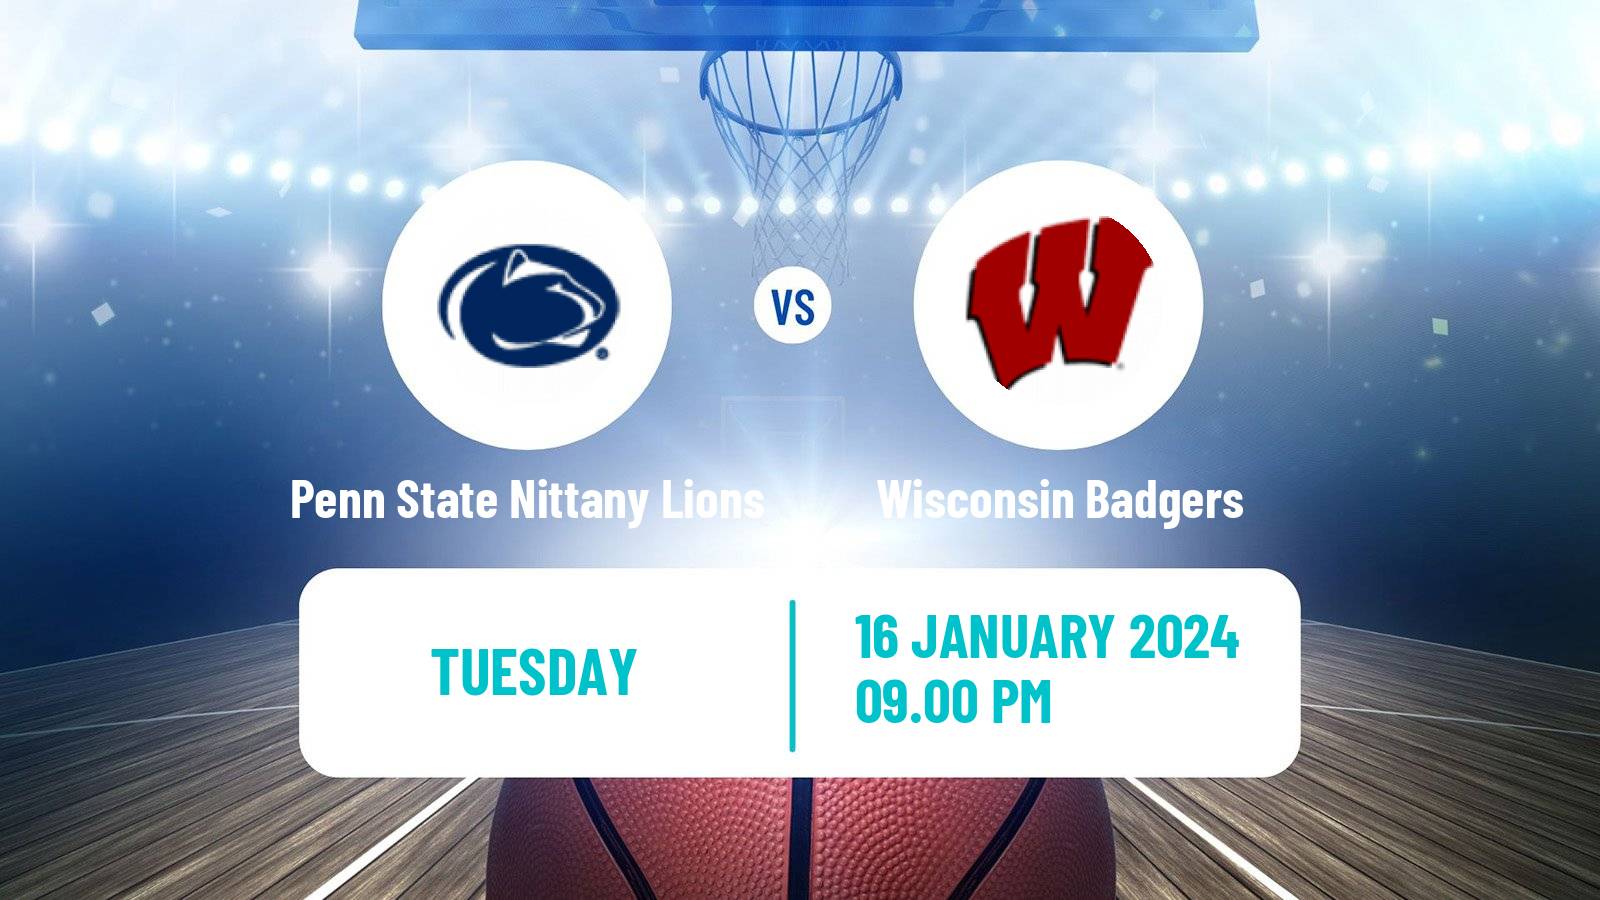 Basketball NCAA College Basketball Penn State Nittany Lions - Wisconsin Badgers